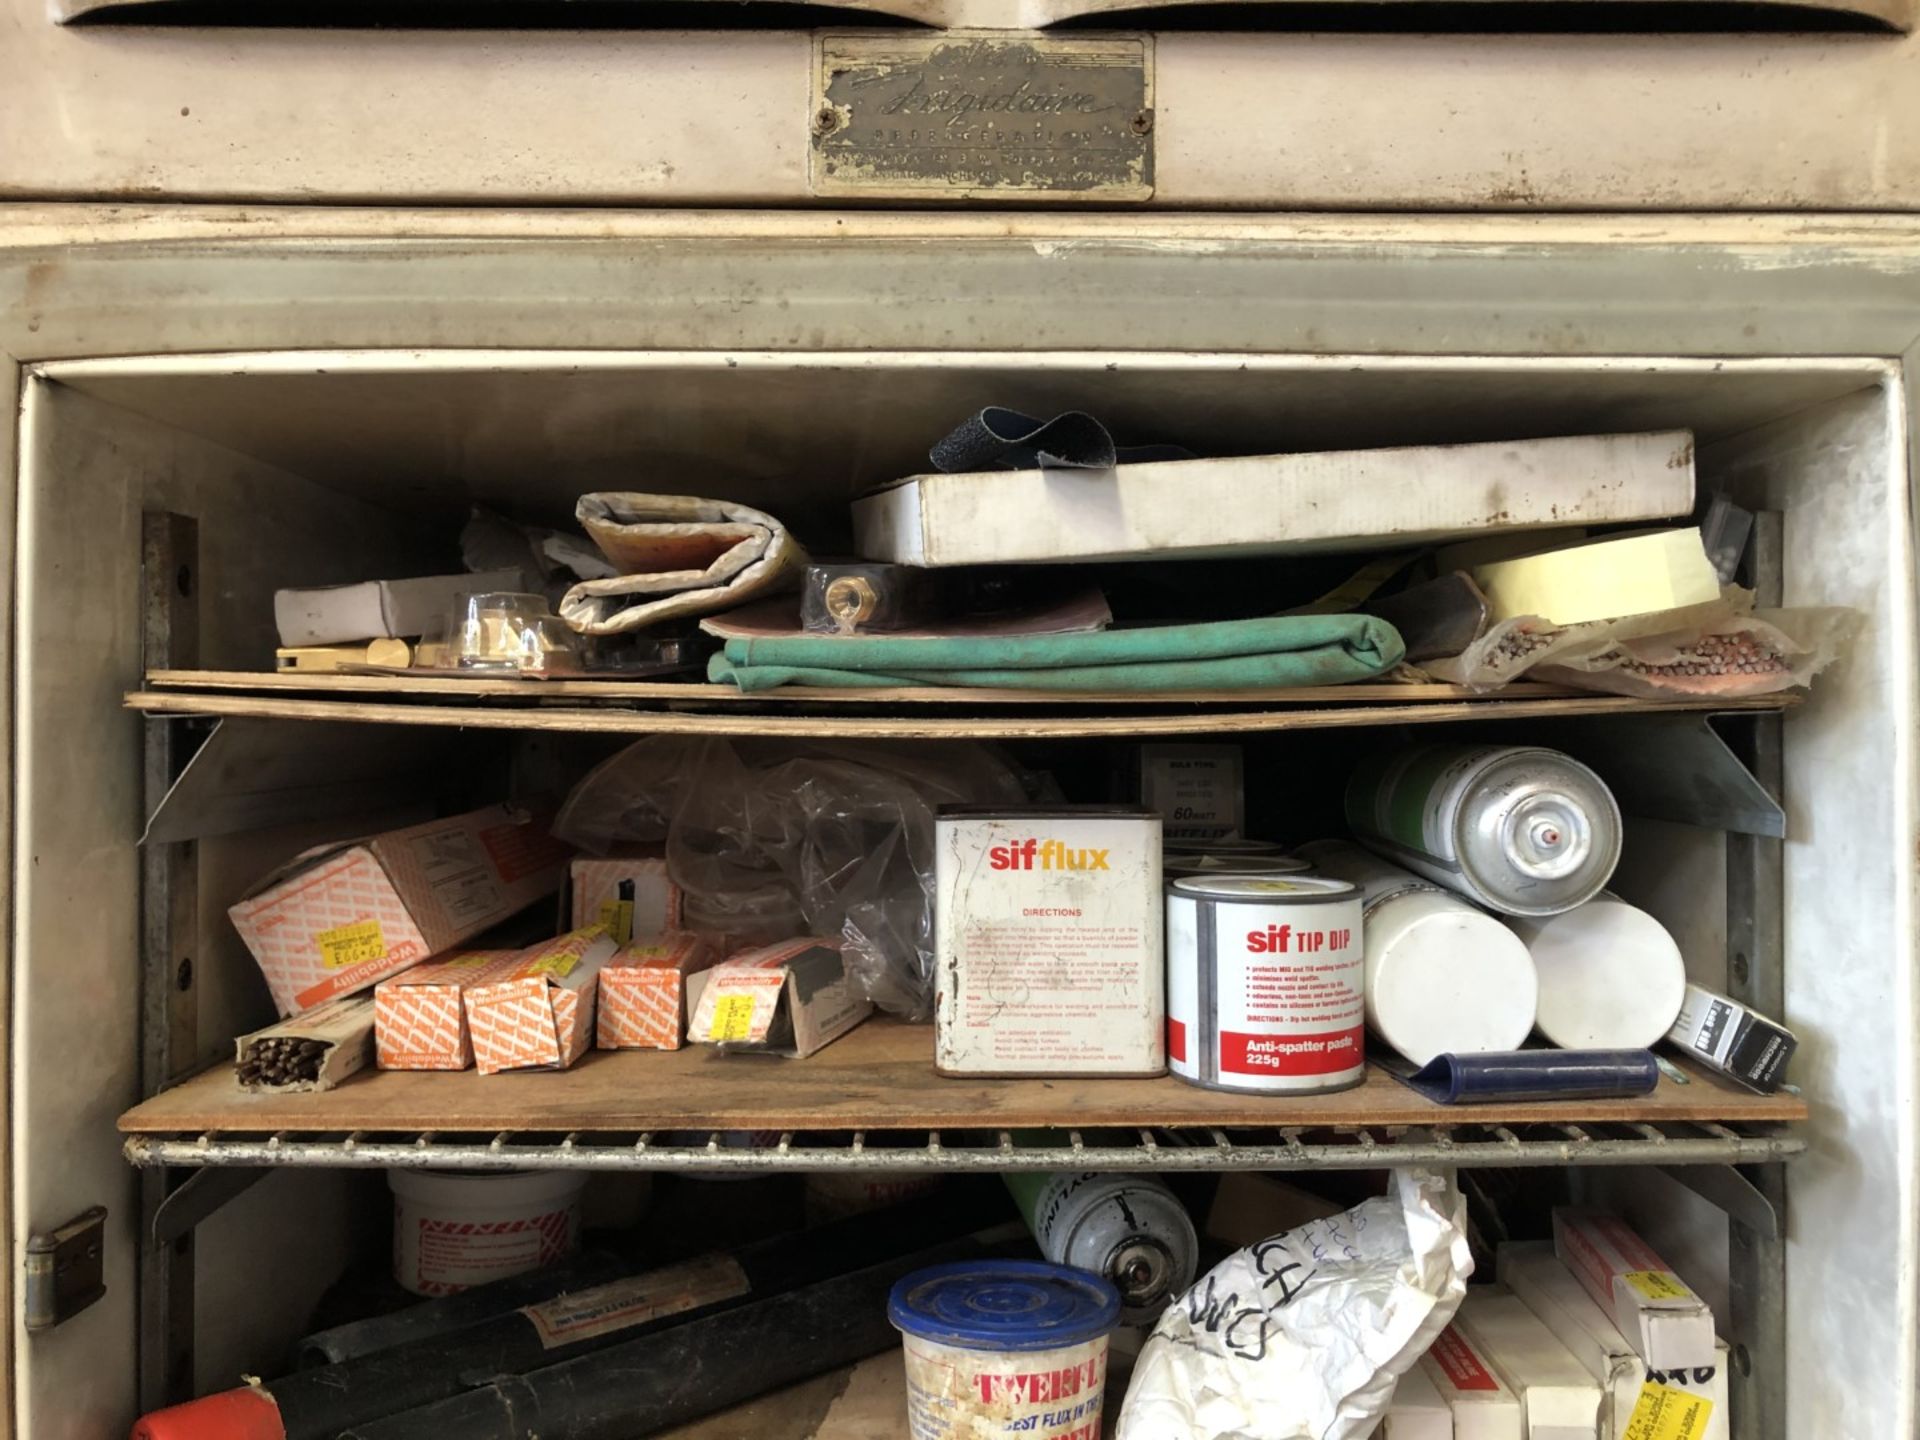 Fridge and contents of welding supplies & light bulbs - Image 2 of 4